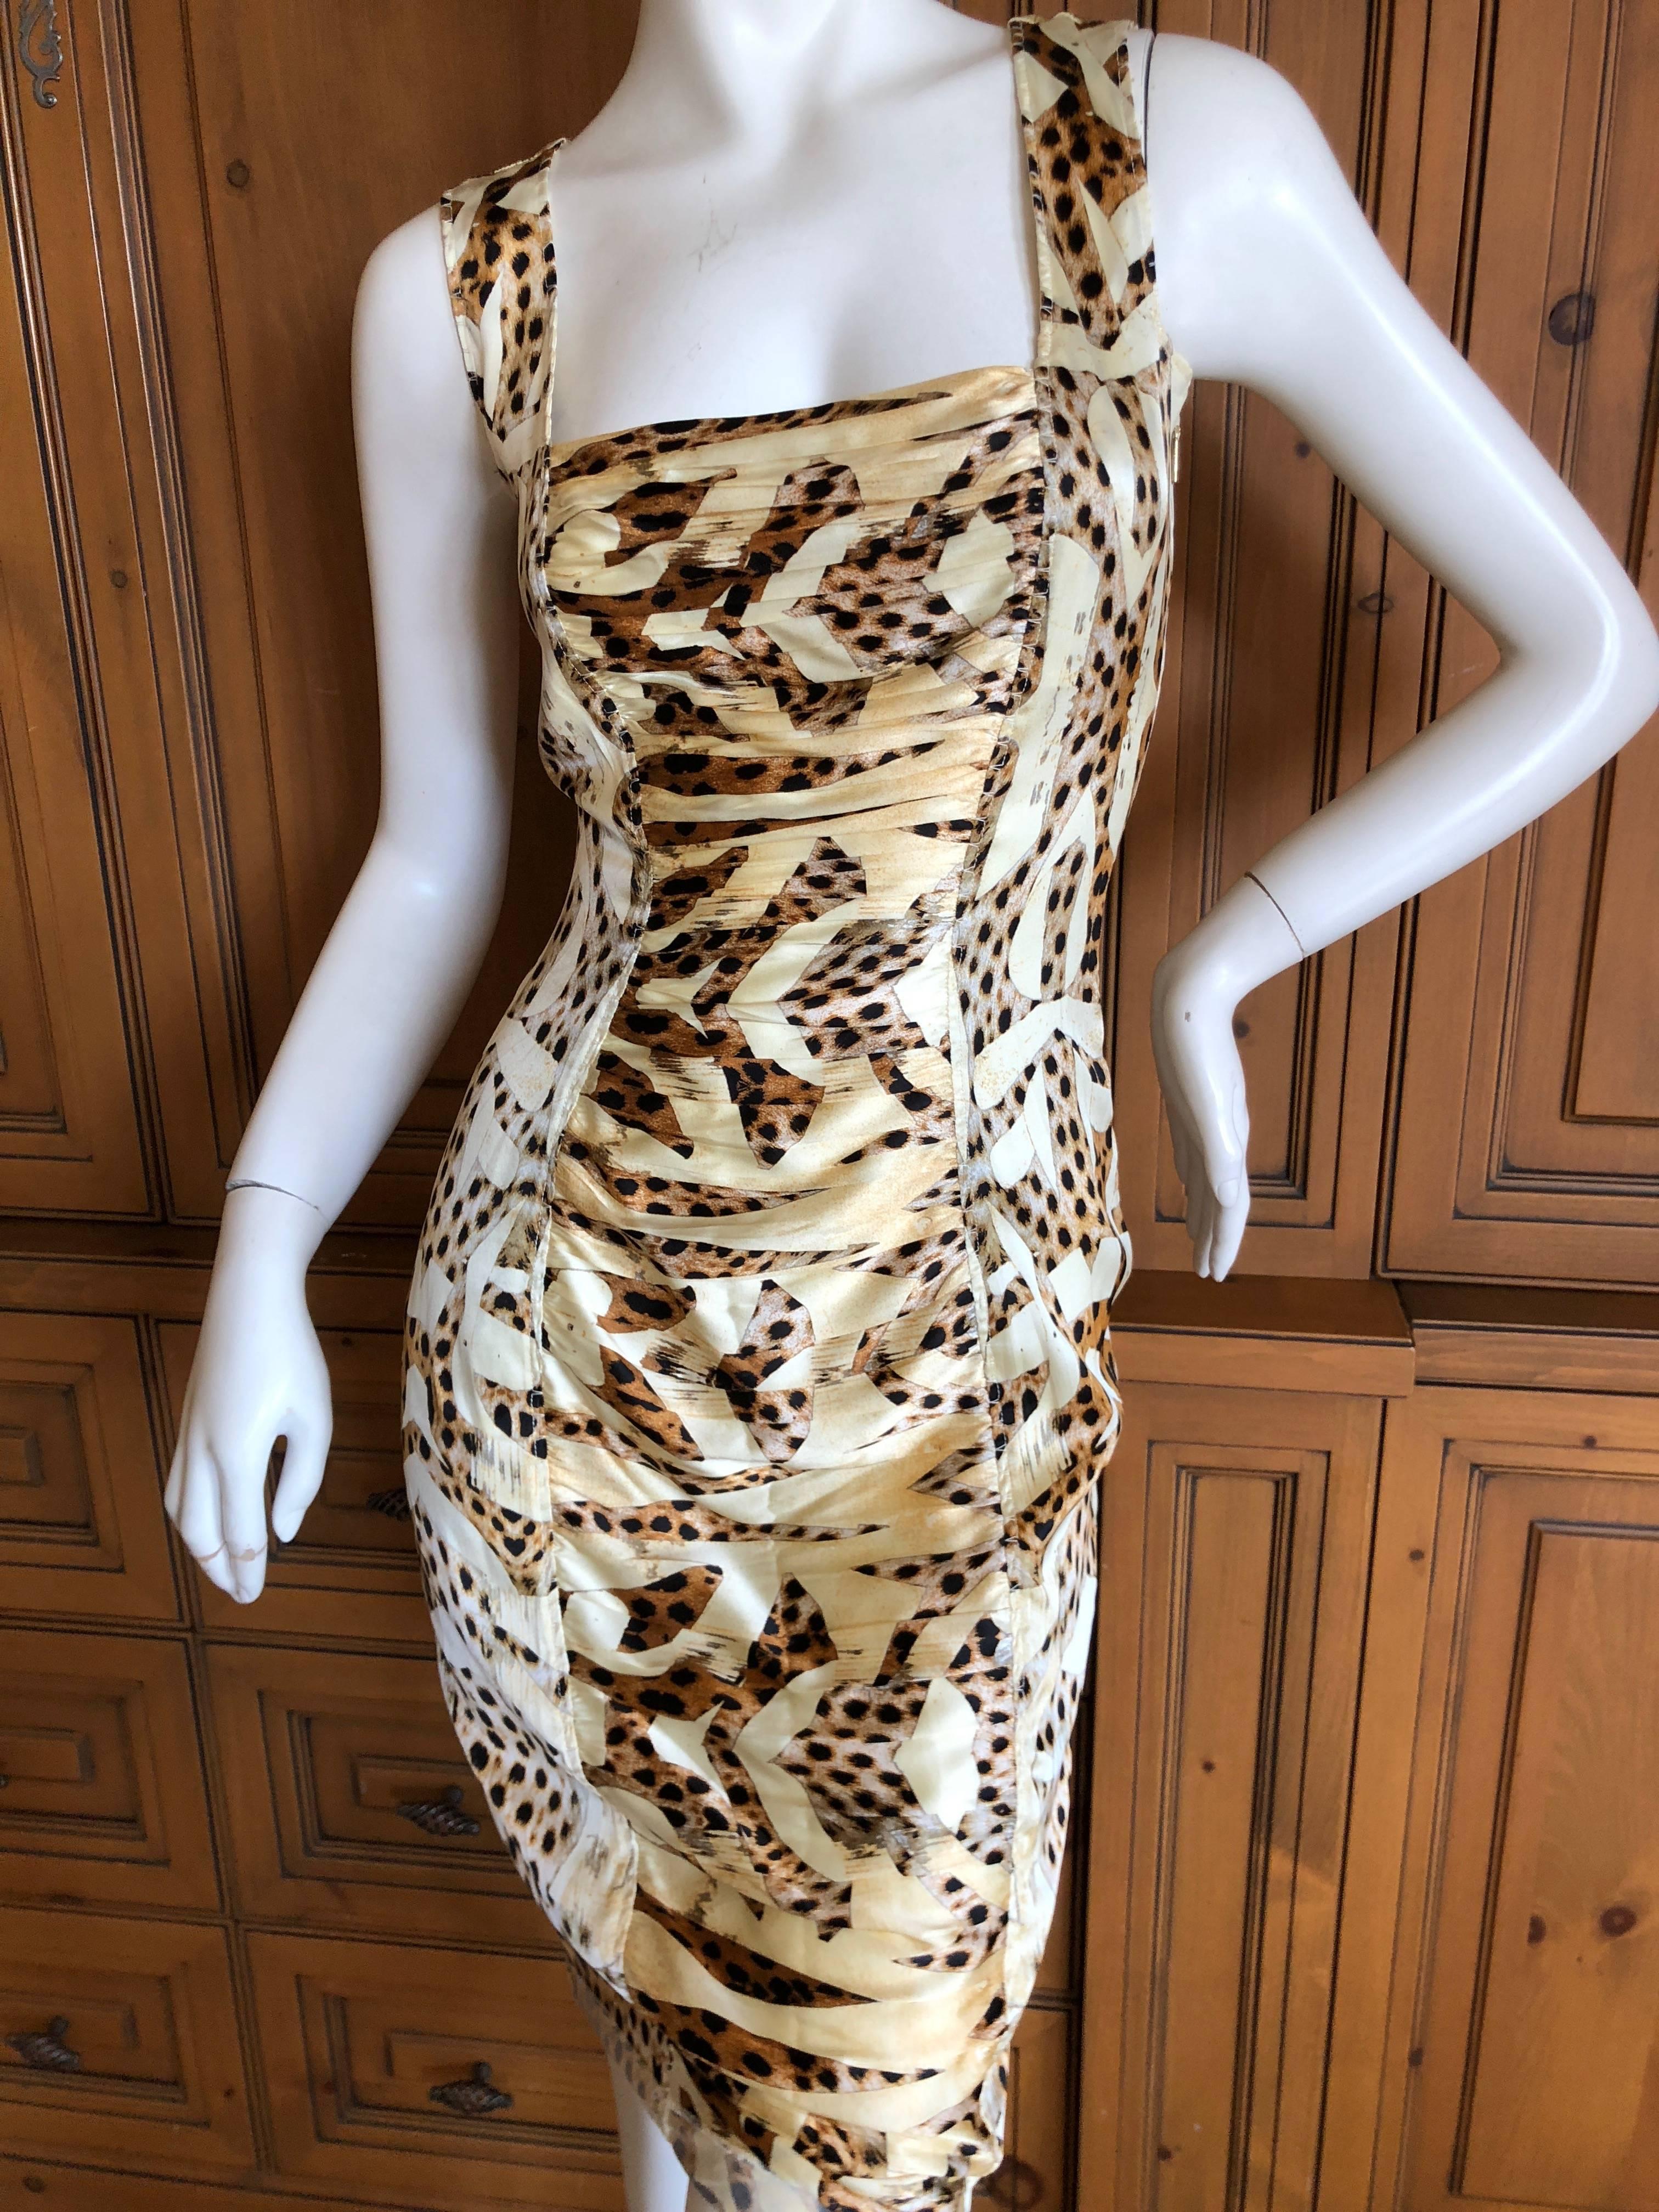 Roberto Cavalli Lovely Vintage Ruched Silk Leopard Print Dress.
This is so pretty, the photos don't do it justice. 

There is a lot of gold in the fabric patterns .

There is elasticized ruching , and a lot of stretch  

Size 40

Bust 36